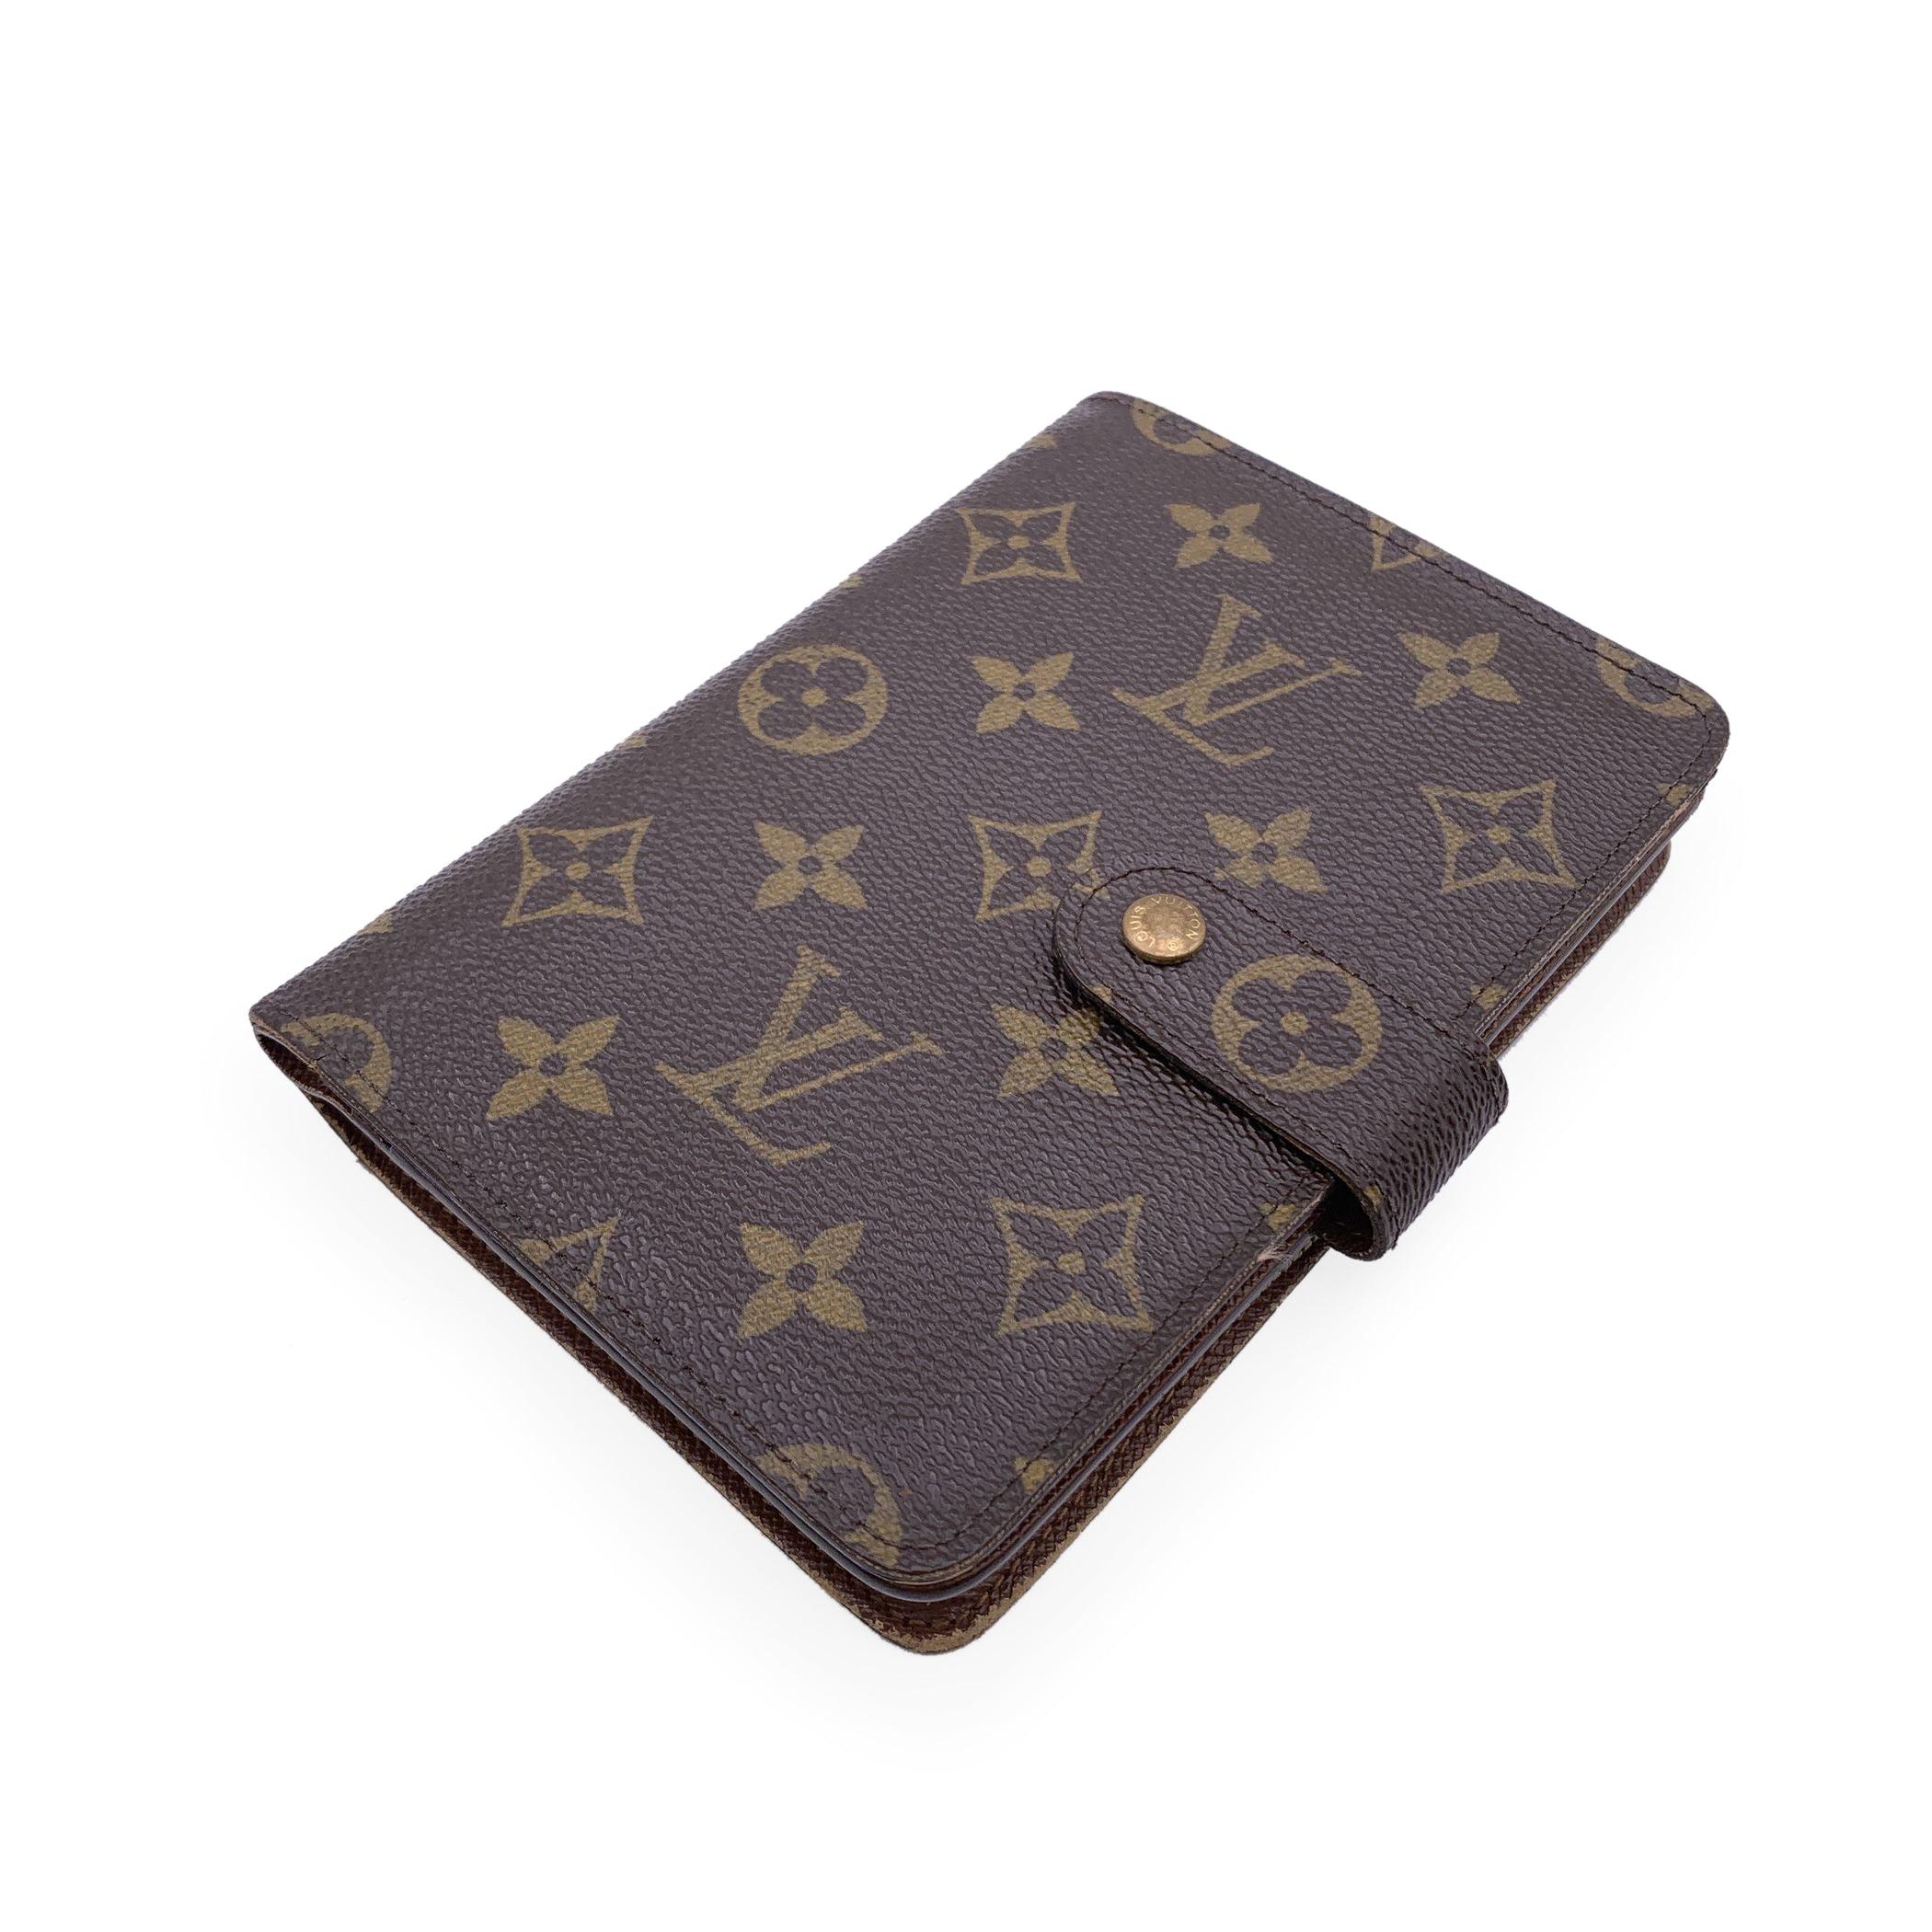 Louis Vuitton bifold Porte Paioer Zip Wallet. Snap button. Rear zip coin compartment. Crafted in brown monogram canvas with brown leather interior. Inside it features 1 bill compartment, 5 credit card slots and 2 open pockets inside. 'Louis Vuitton